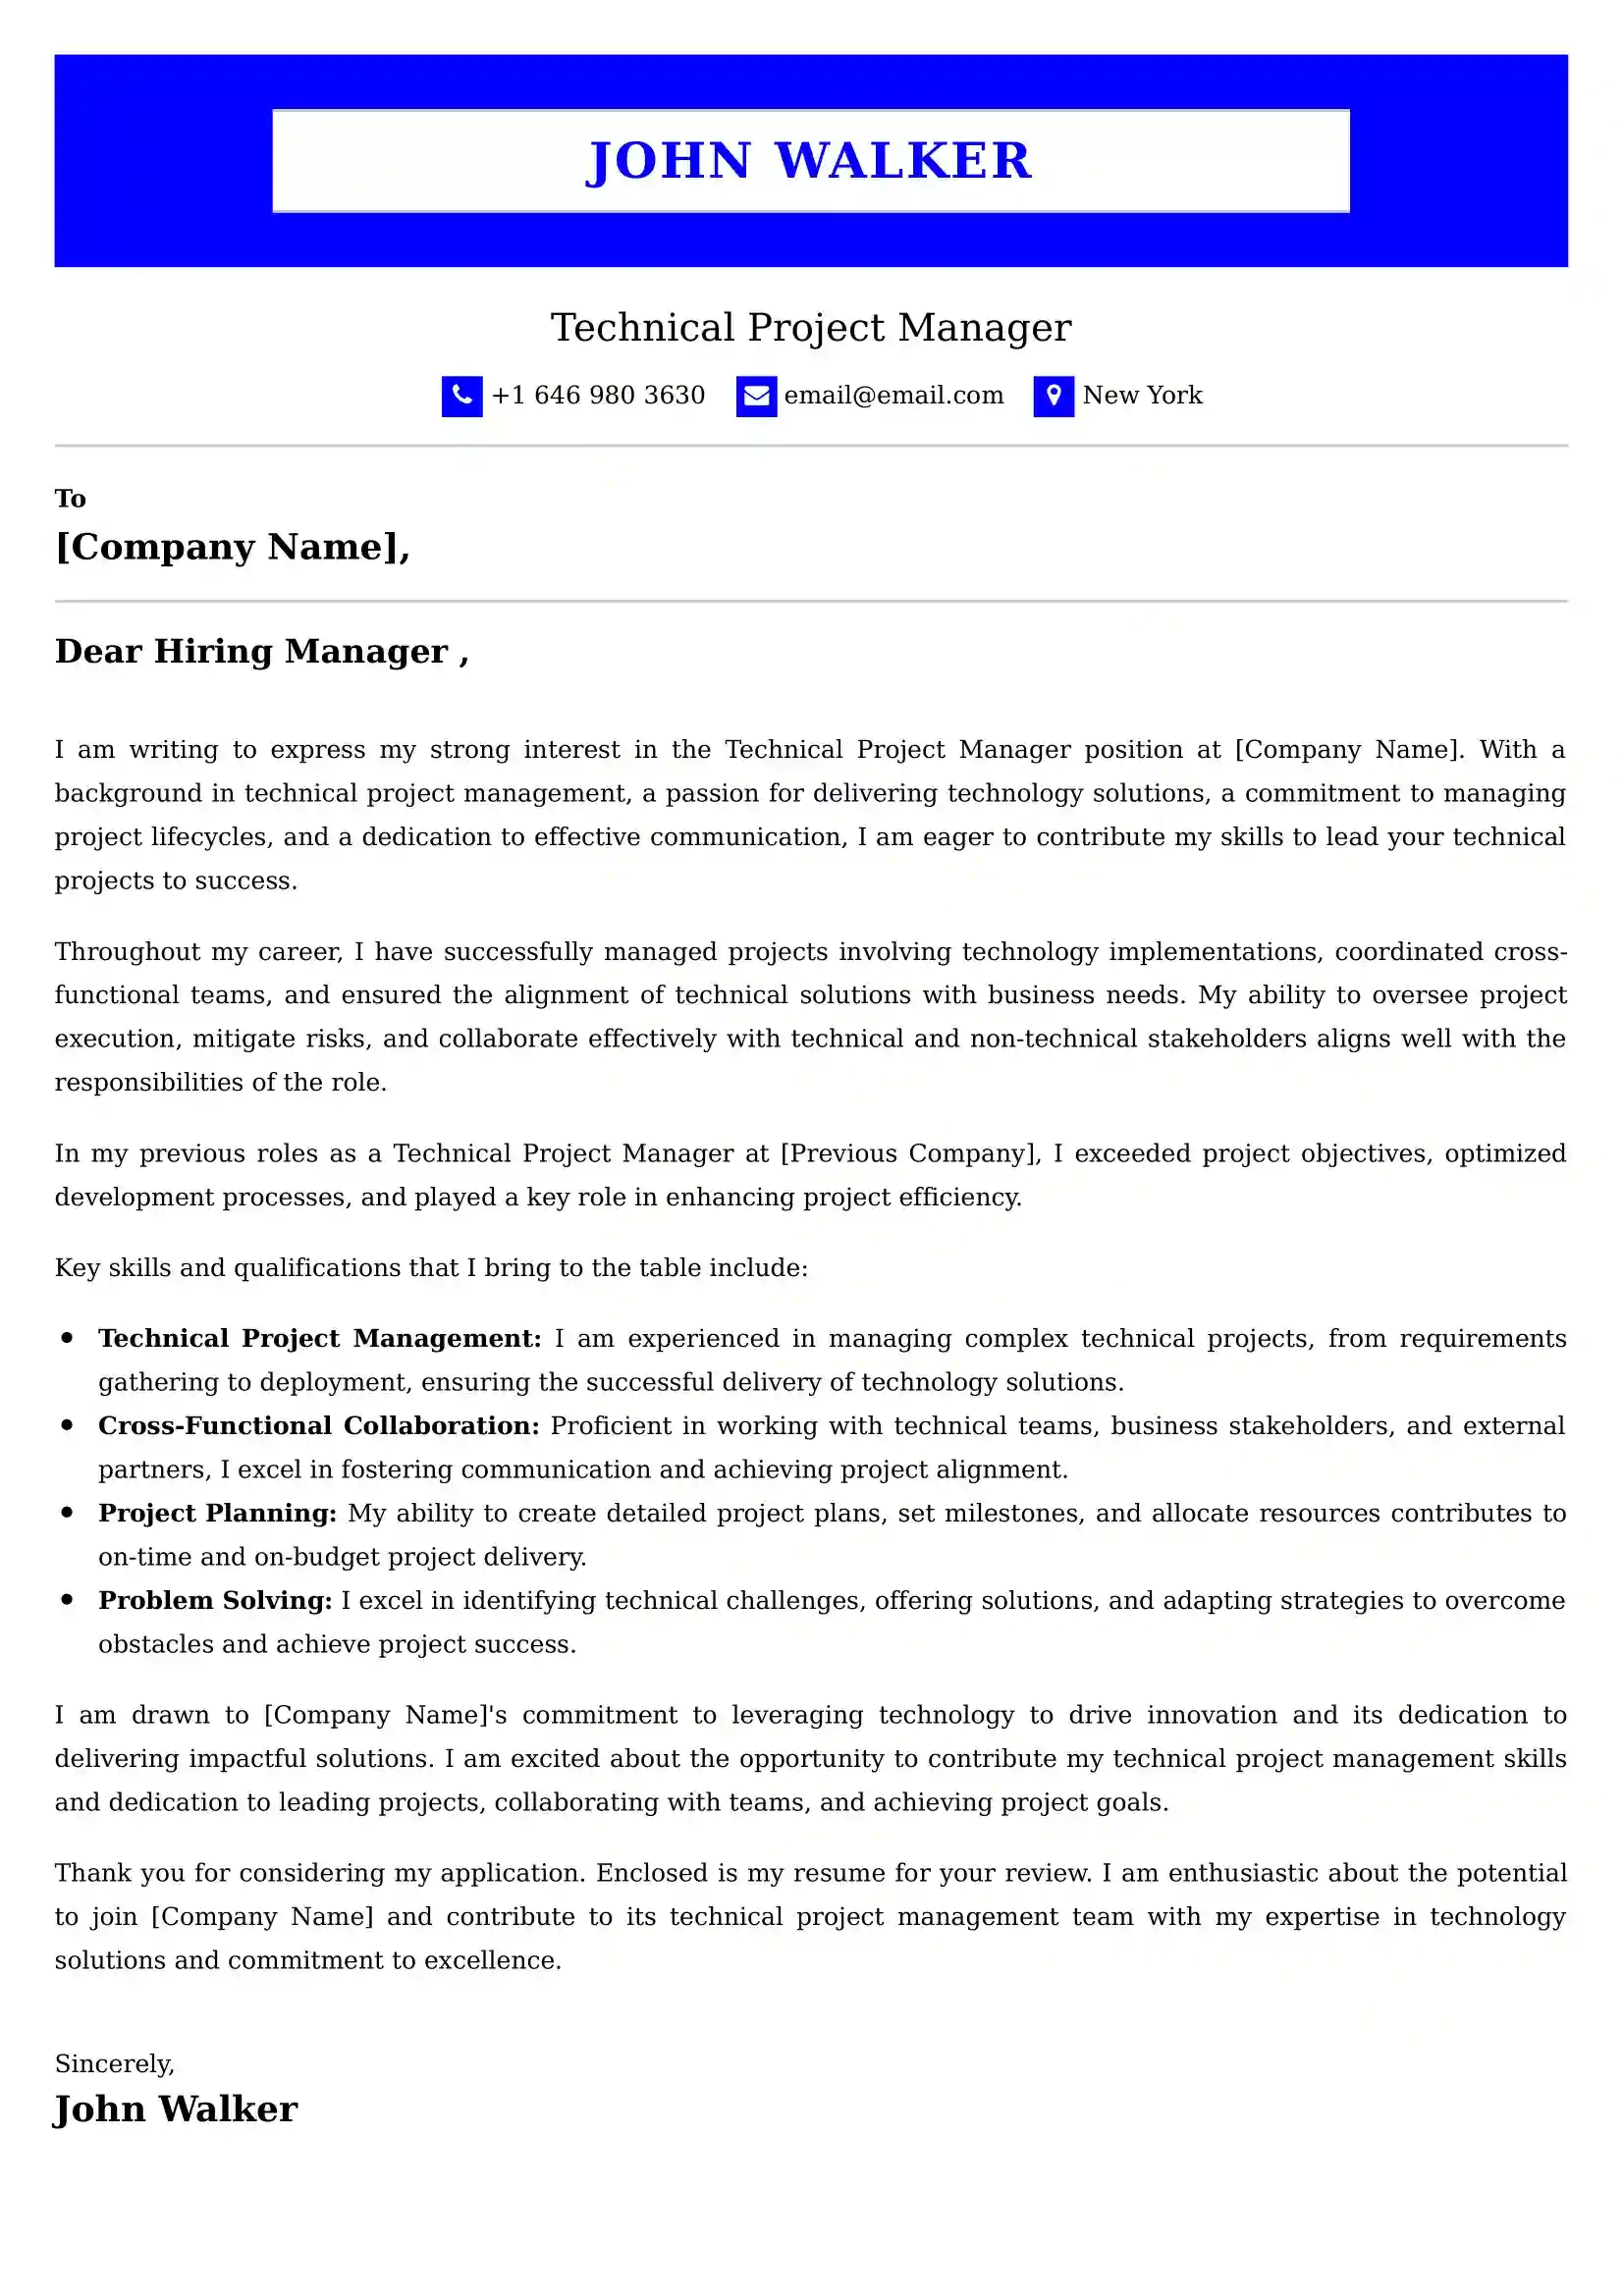 Technical Project Manager Cover letter Sample